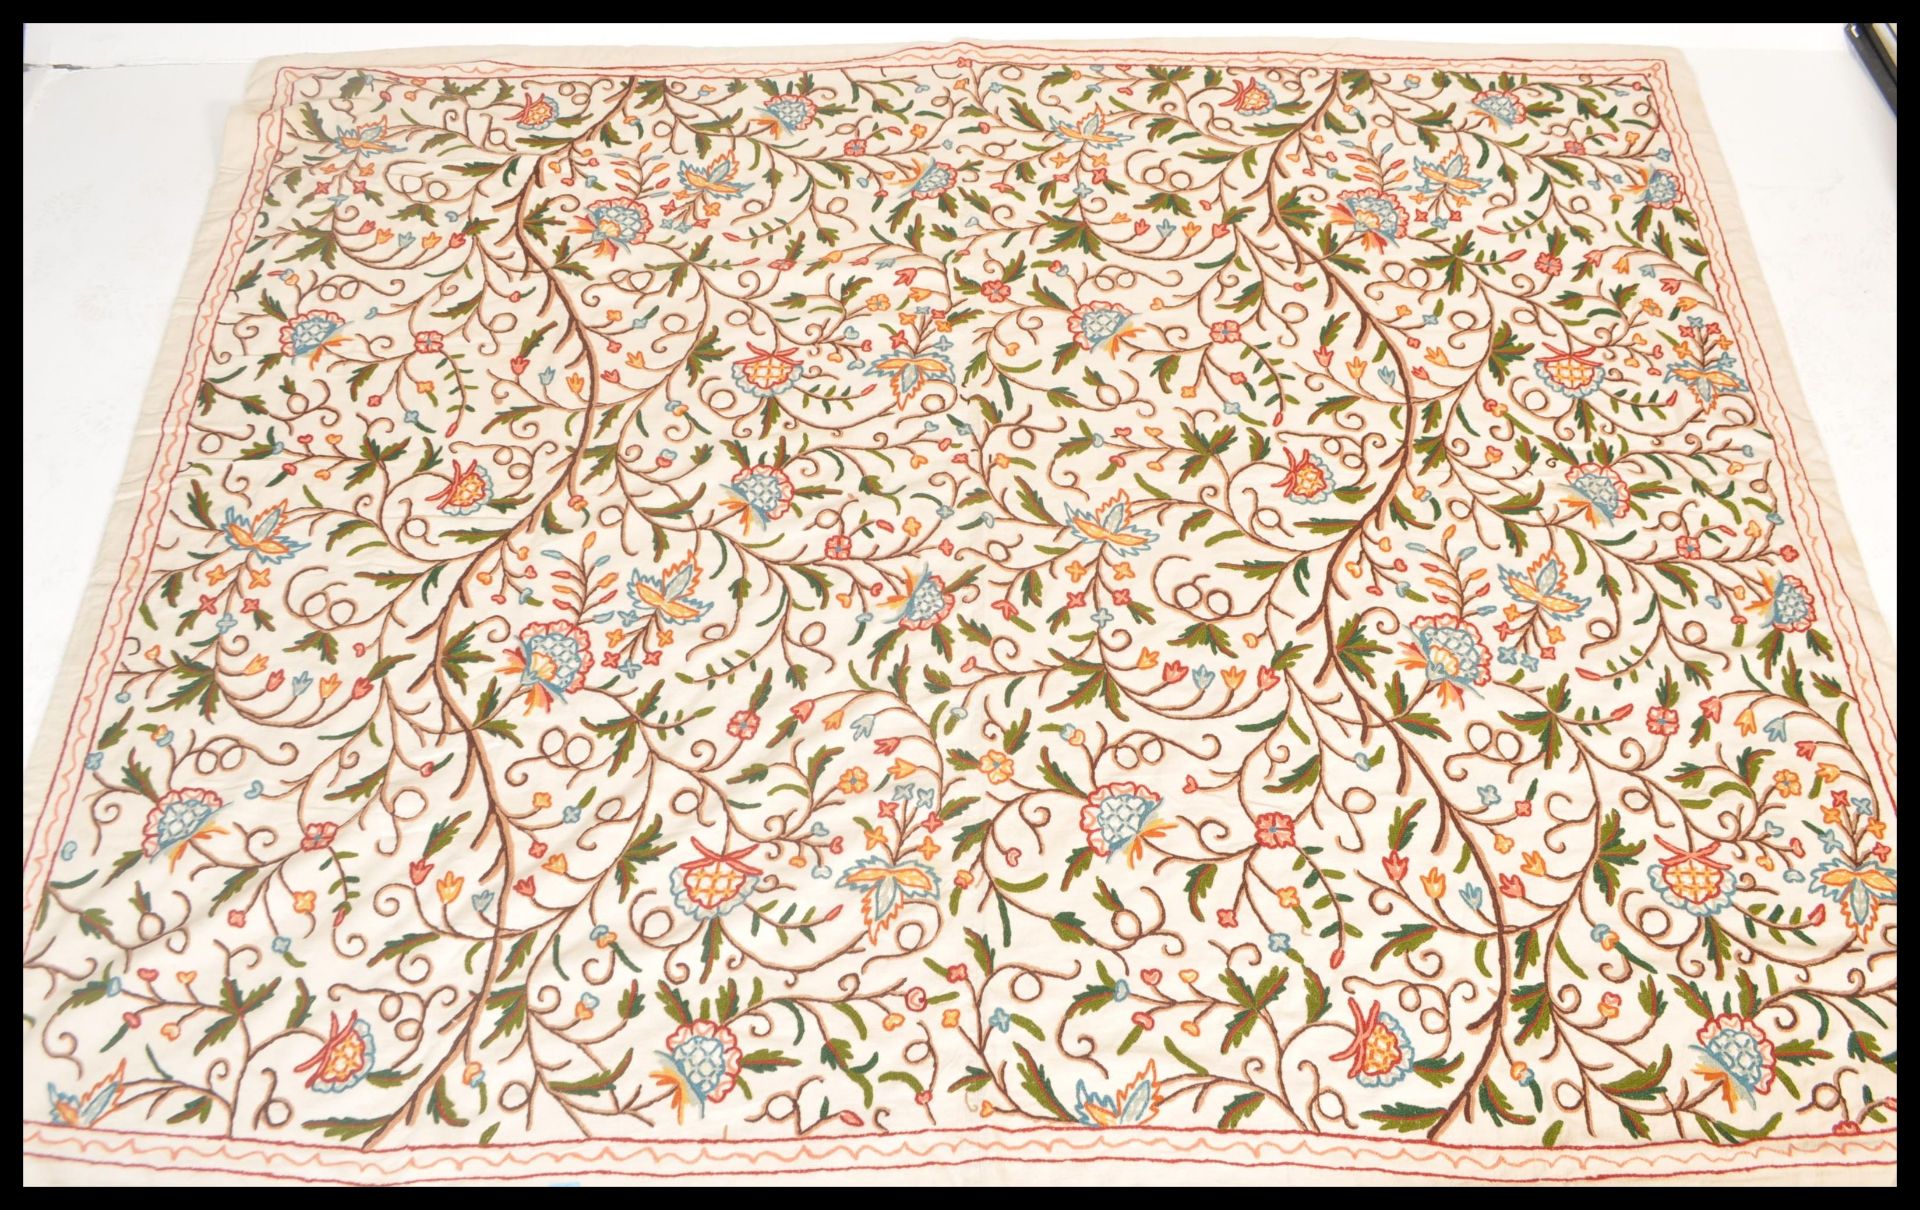 A 20th Century embroidered crewel work throw blanket on a woven white fabric ground with embroidered